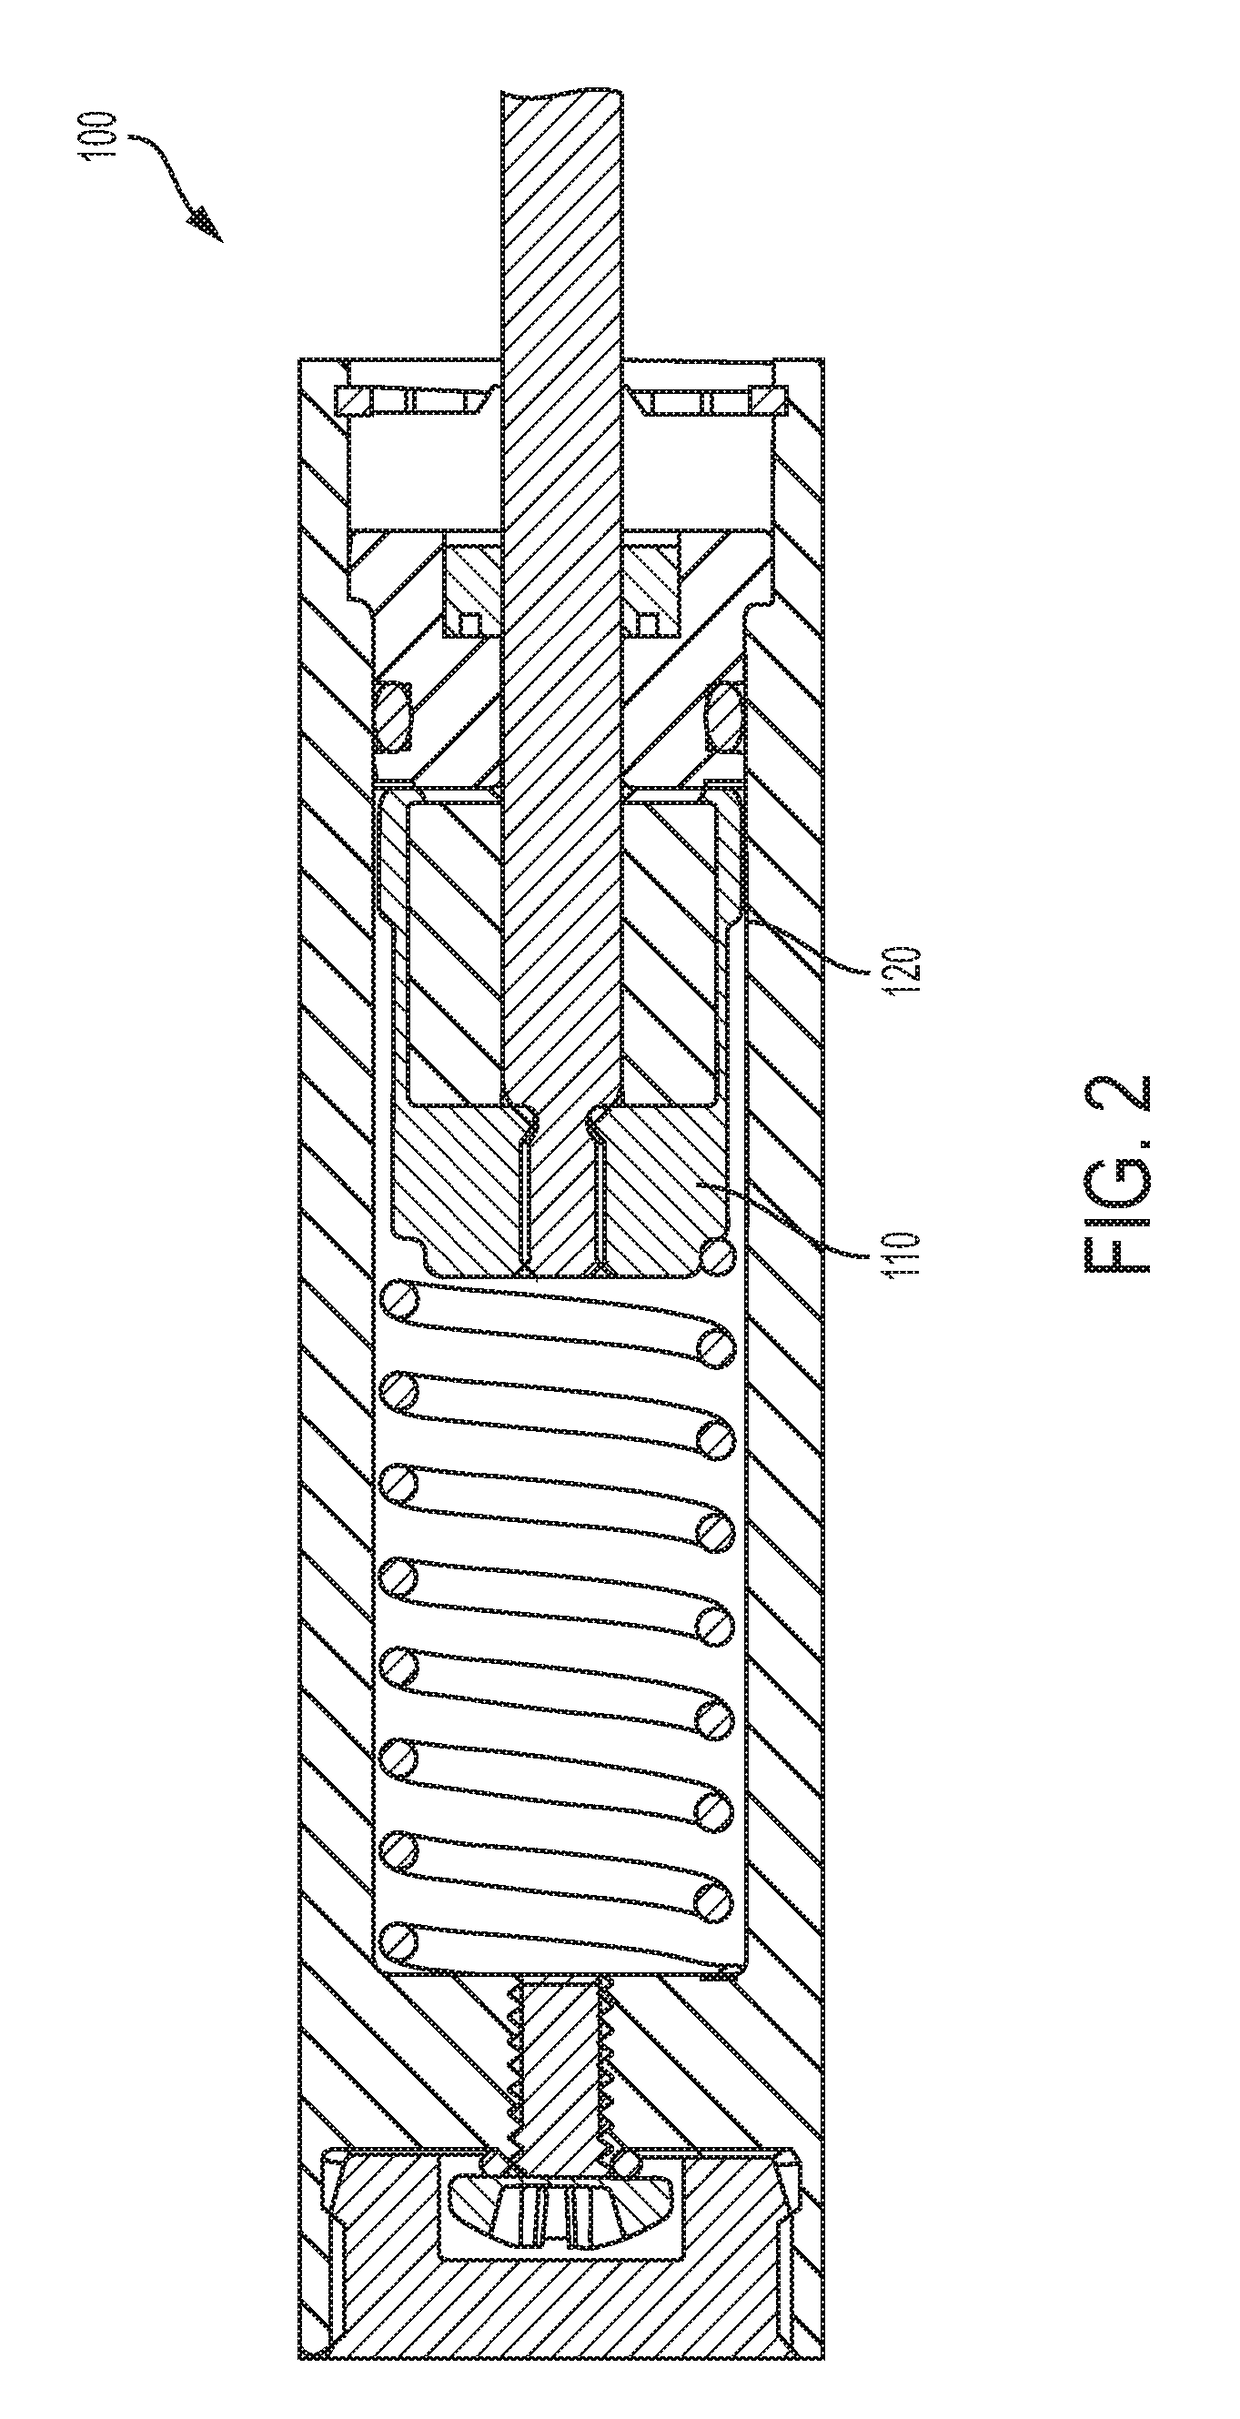 Hydraulic energy absorption device with a displaceable accumulator